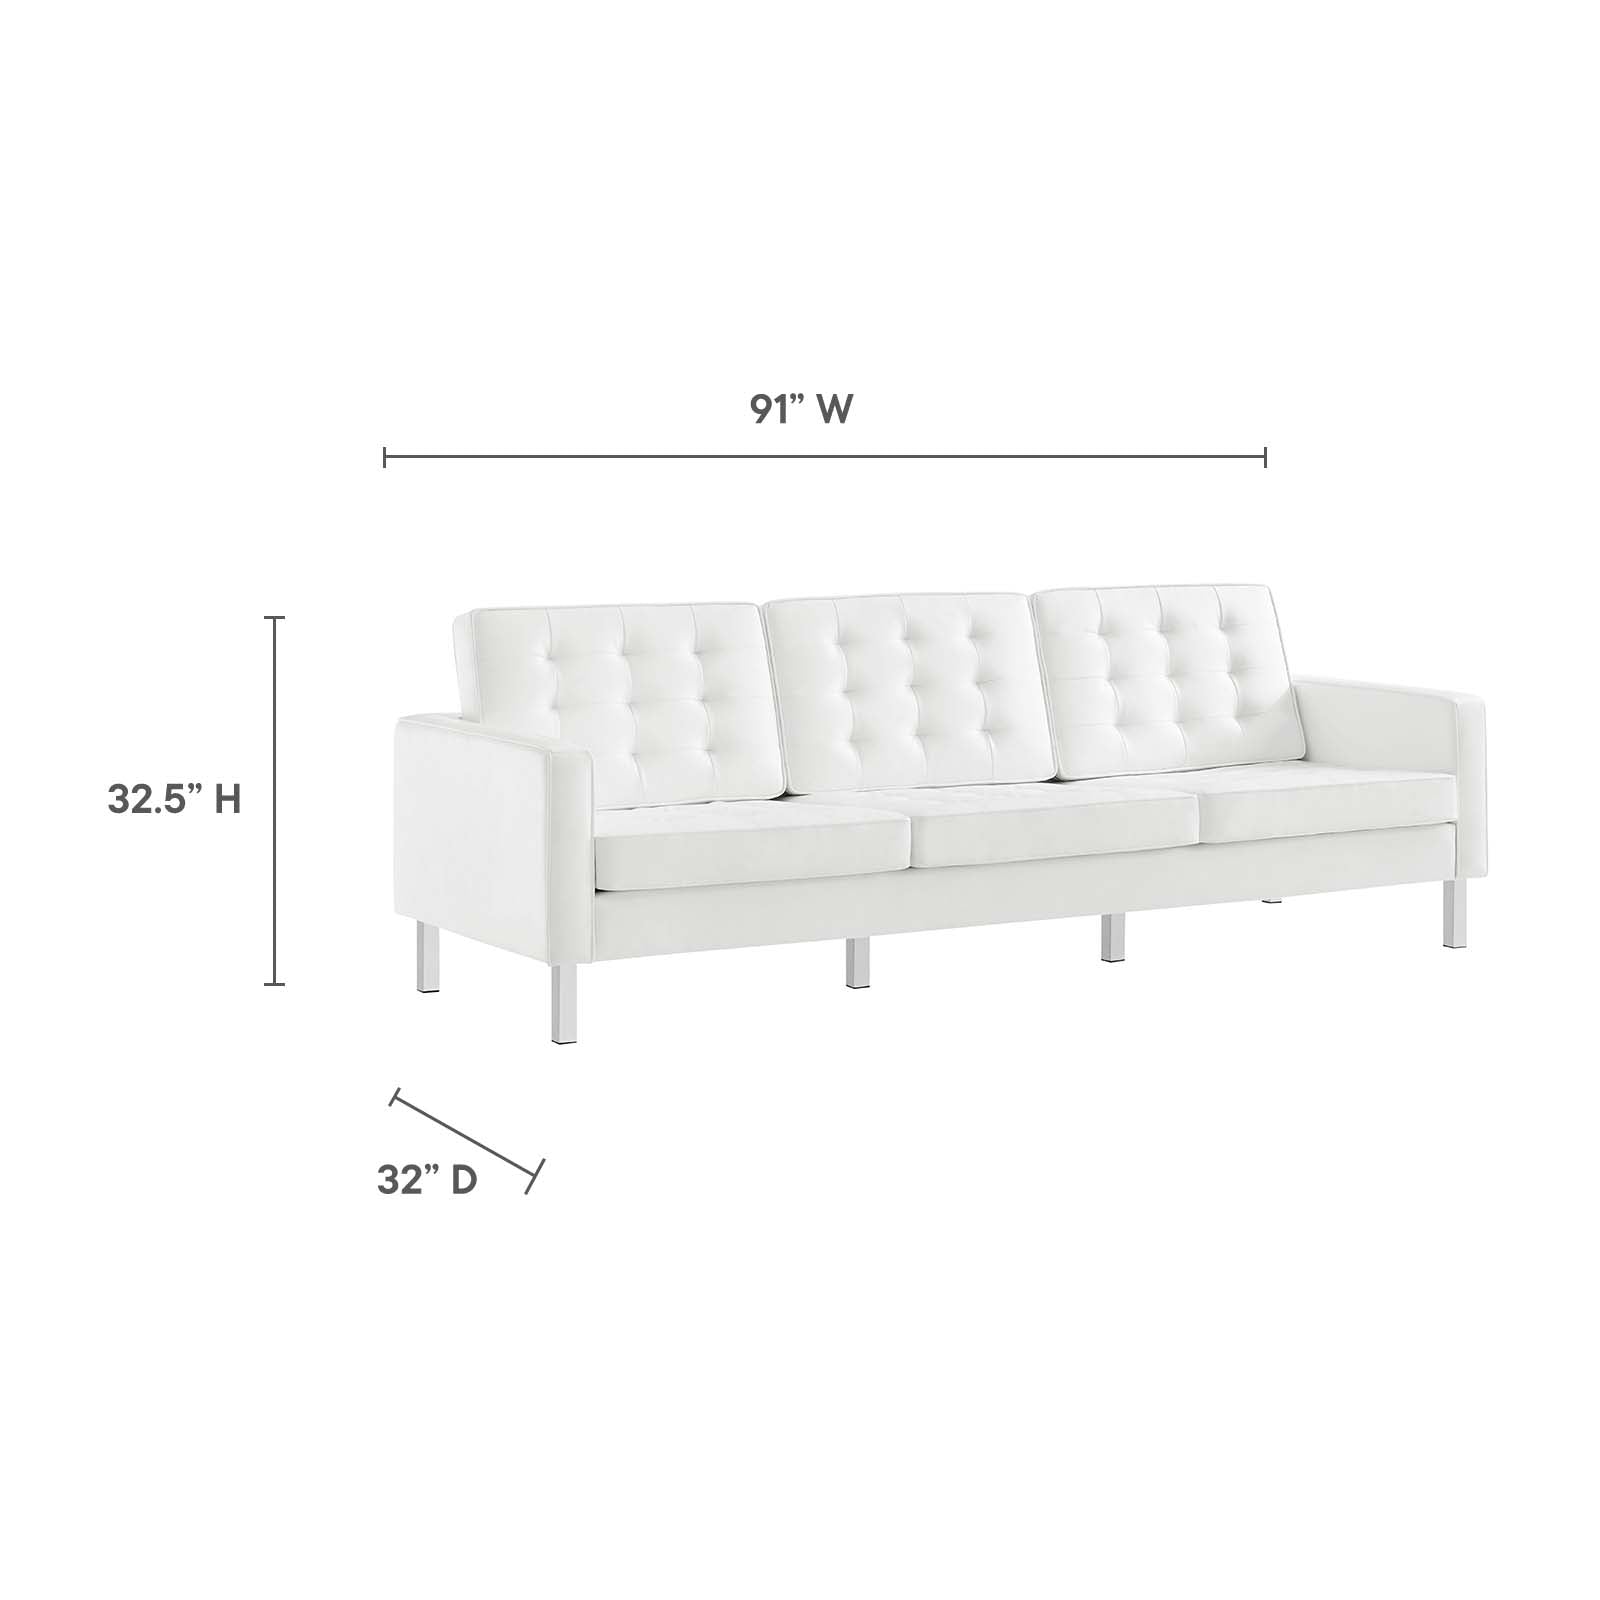 Modway Living Room Sets - Loft Tufted Upholstered Faux Leather Sofa and Loveseat Set Silver White